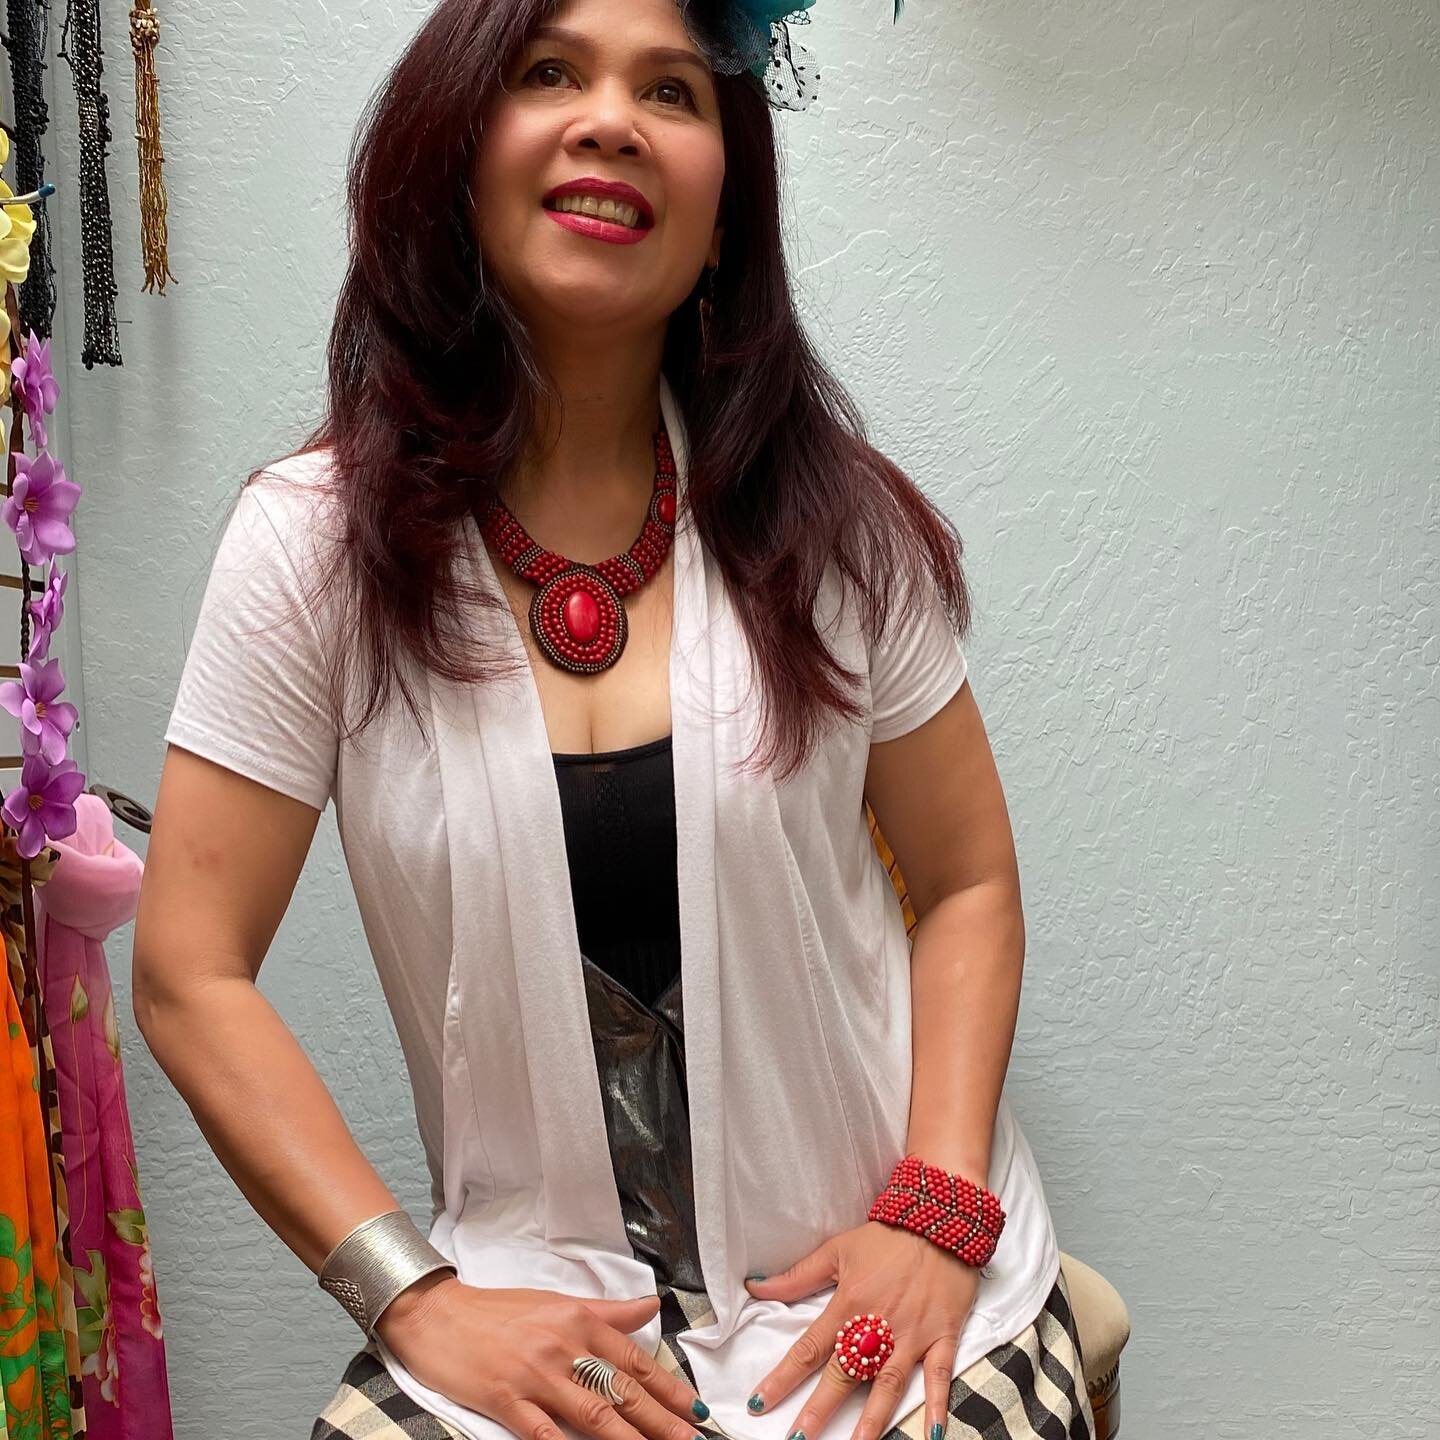 We carry the high quality accessories and make you feel happy all day! #highquality #accessories #thaijewelry #handmade #rings #necklaces #tingsthaiculture #mainstreet #fortbraggca